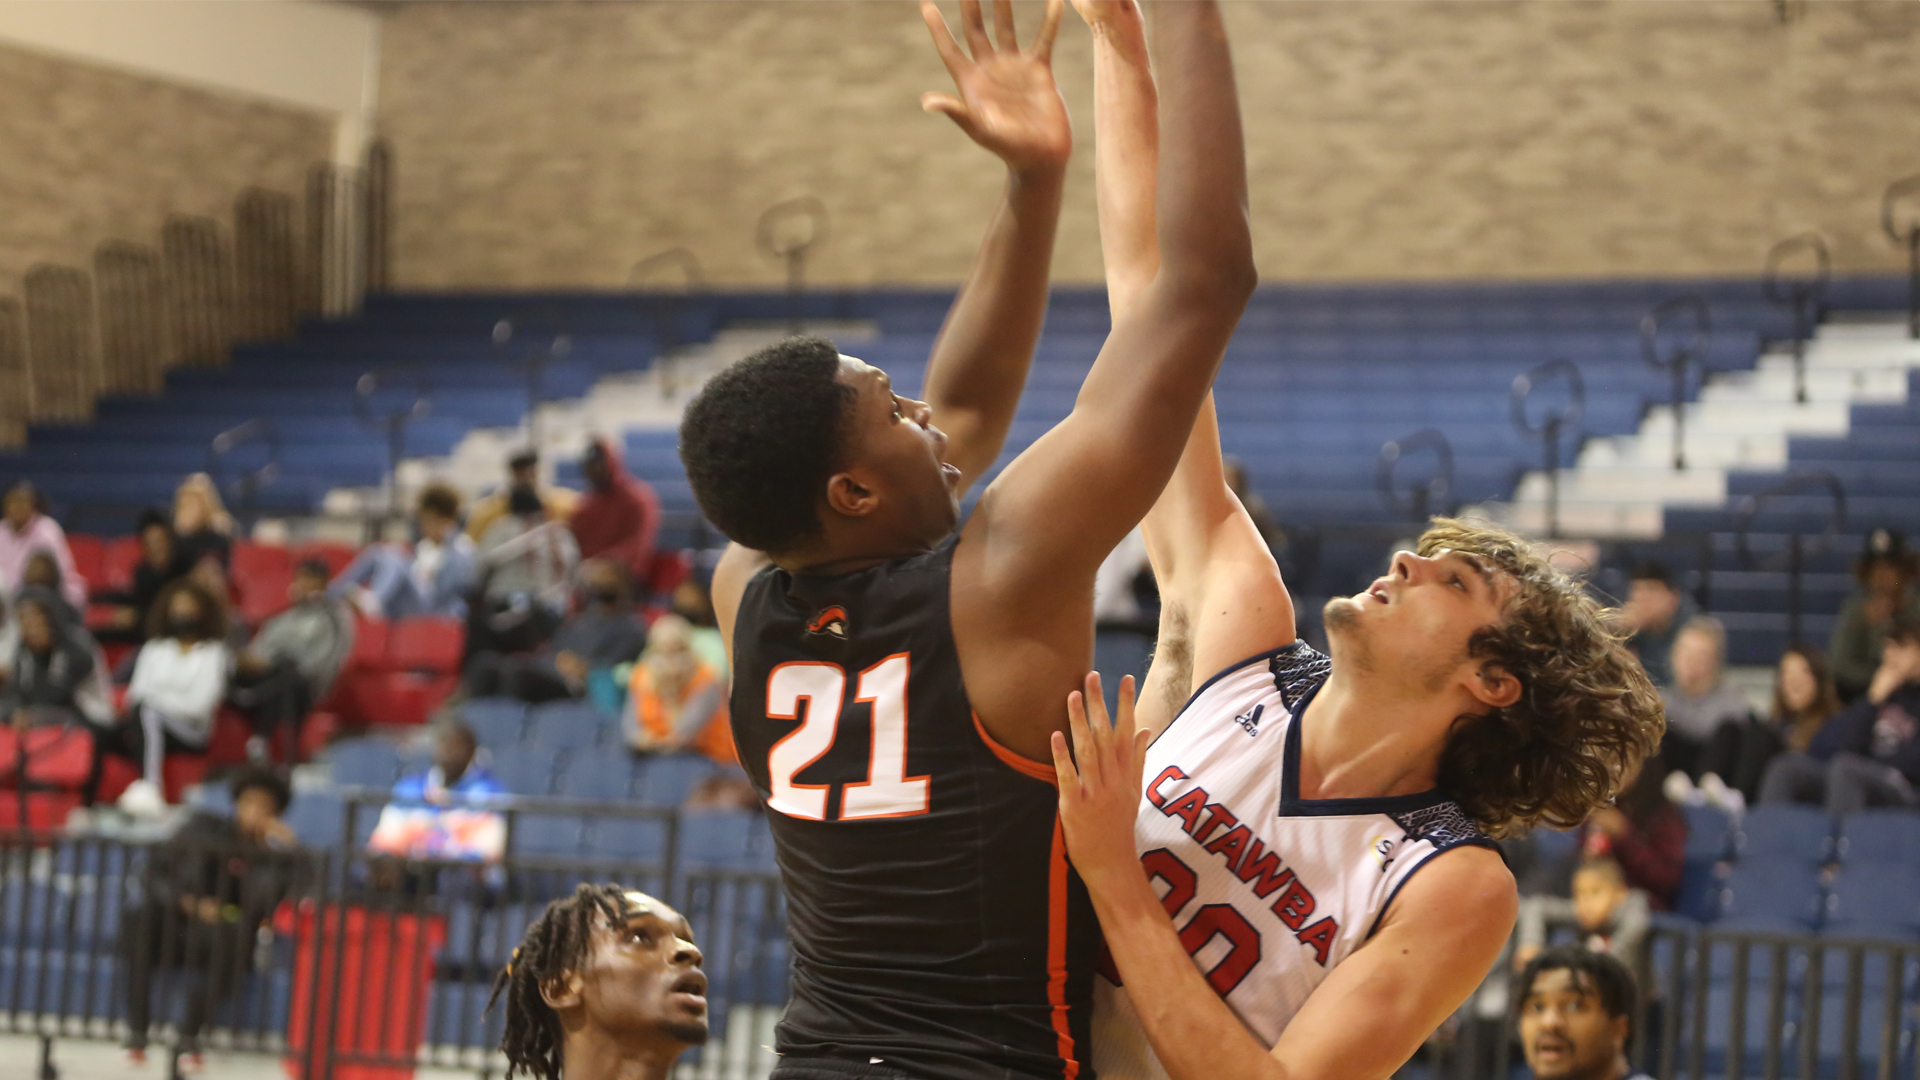 Inady Legiste scored a career-high 24 points in Tusculum's 69-49 road win at Lenoir-Rhyne